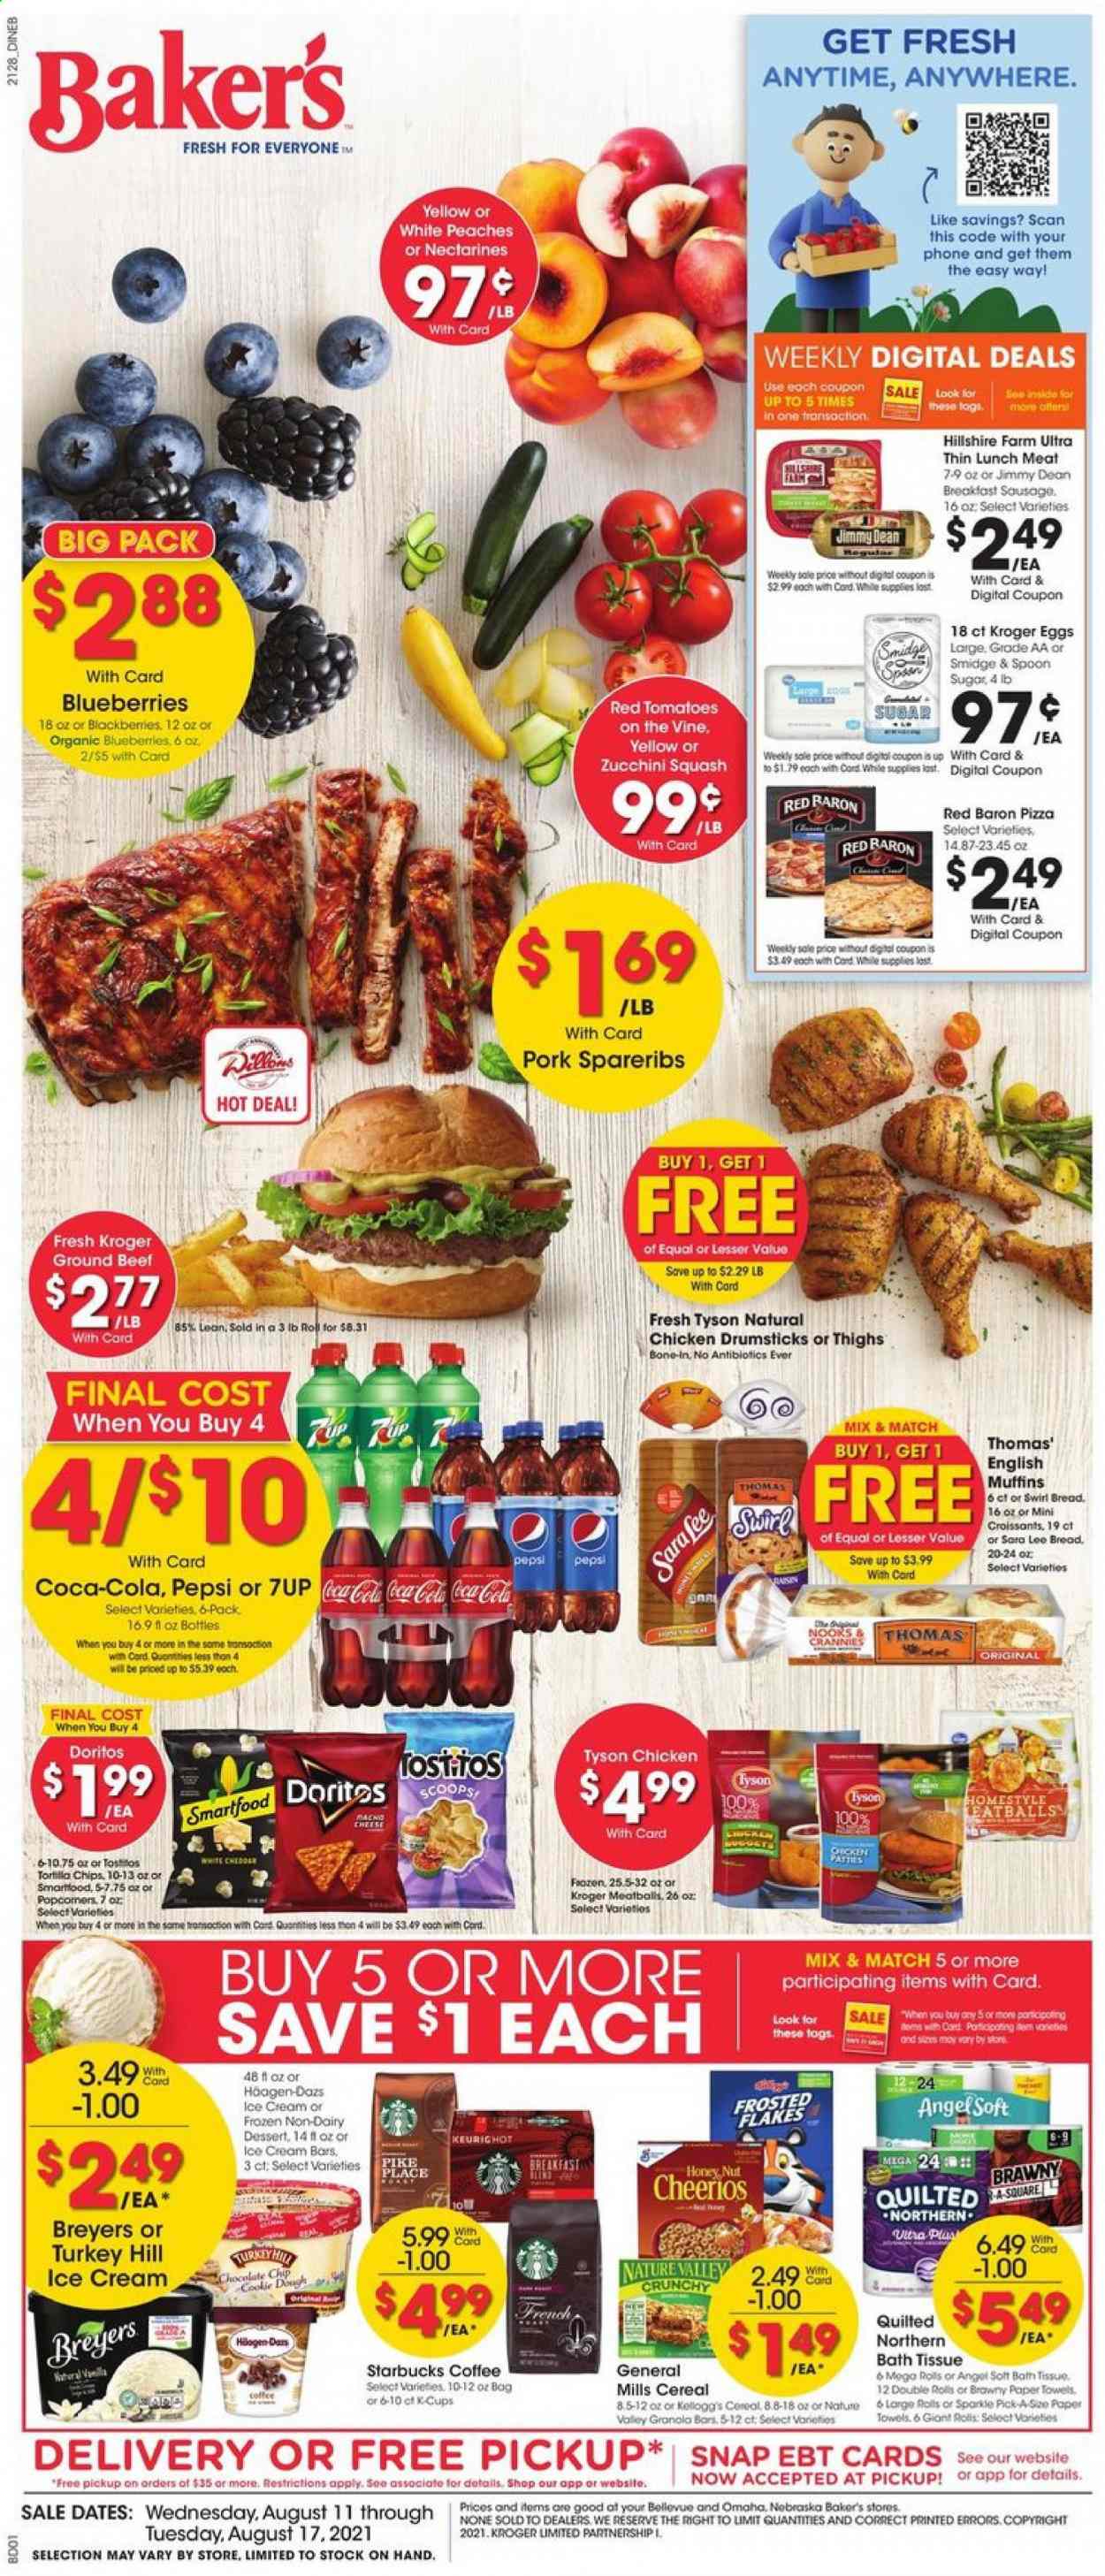 thumbnail - Baker's Flyer - 08/11/2021 - 08/17/2021 - Sales products - bread, english muffins, Sara Lee, zucchini, blueberries, pizza, Jimmy Dean, Hillshire Farm, sausage, lunch meat, eggs, ice cream, ice cream bars, Häagen-Dazs, Red Baron, cookie dough, Kellogg's, Doritos, tortilla chips, Smartfood, Tostitos, sugar, cereals, Cheerios, granola bar, Frosted Flakes, Coca-Cola, Pepsi, 7UP, coffee, Starbucks, chicken drumsticks, beef meat, ground beef, pork spare ribs, bath tissue, Quilted Northern, spoon, towel, Bakers, nectarines, peaches. Page 1.